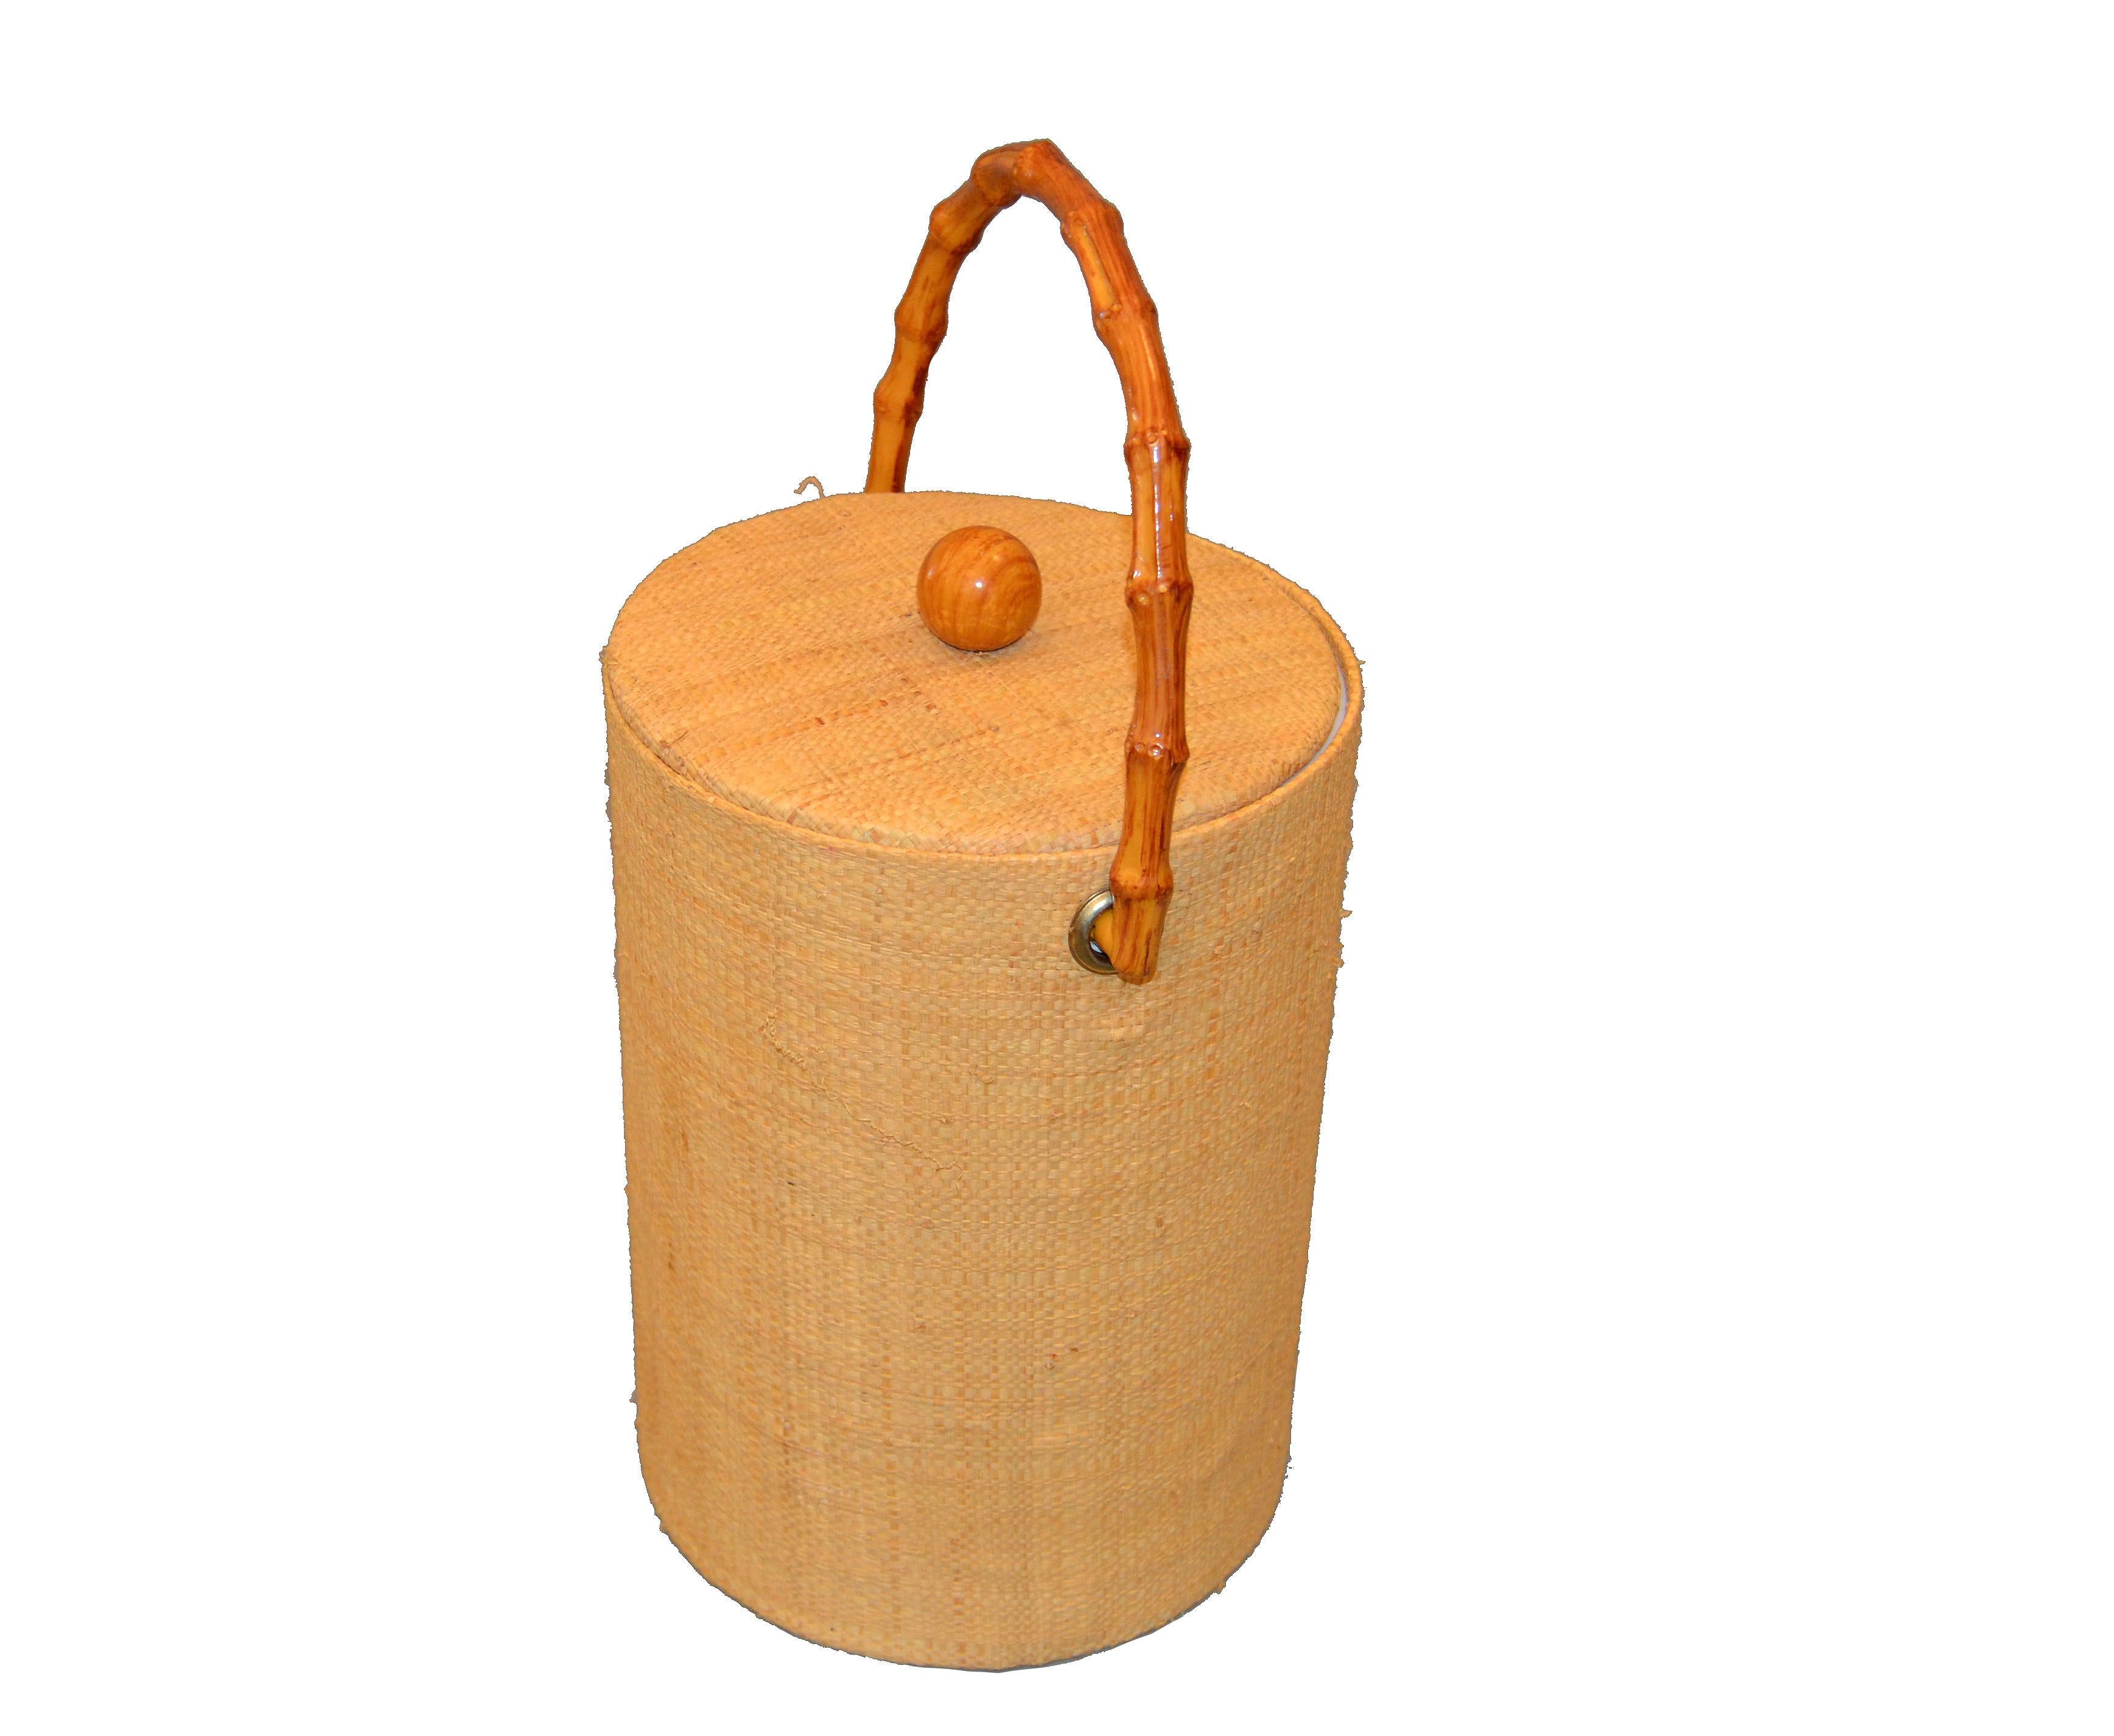 Mid-Century Modern insulated American made ice bucket with lid. 
It is made with elegant woven cane wrapping bands and has an insulated wall and comes with a fitting lid. The handle and knob are made out of Bamboo.
It is perfect for cooling wine,